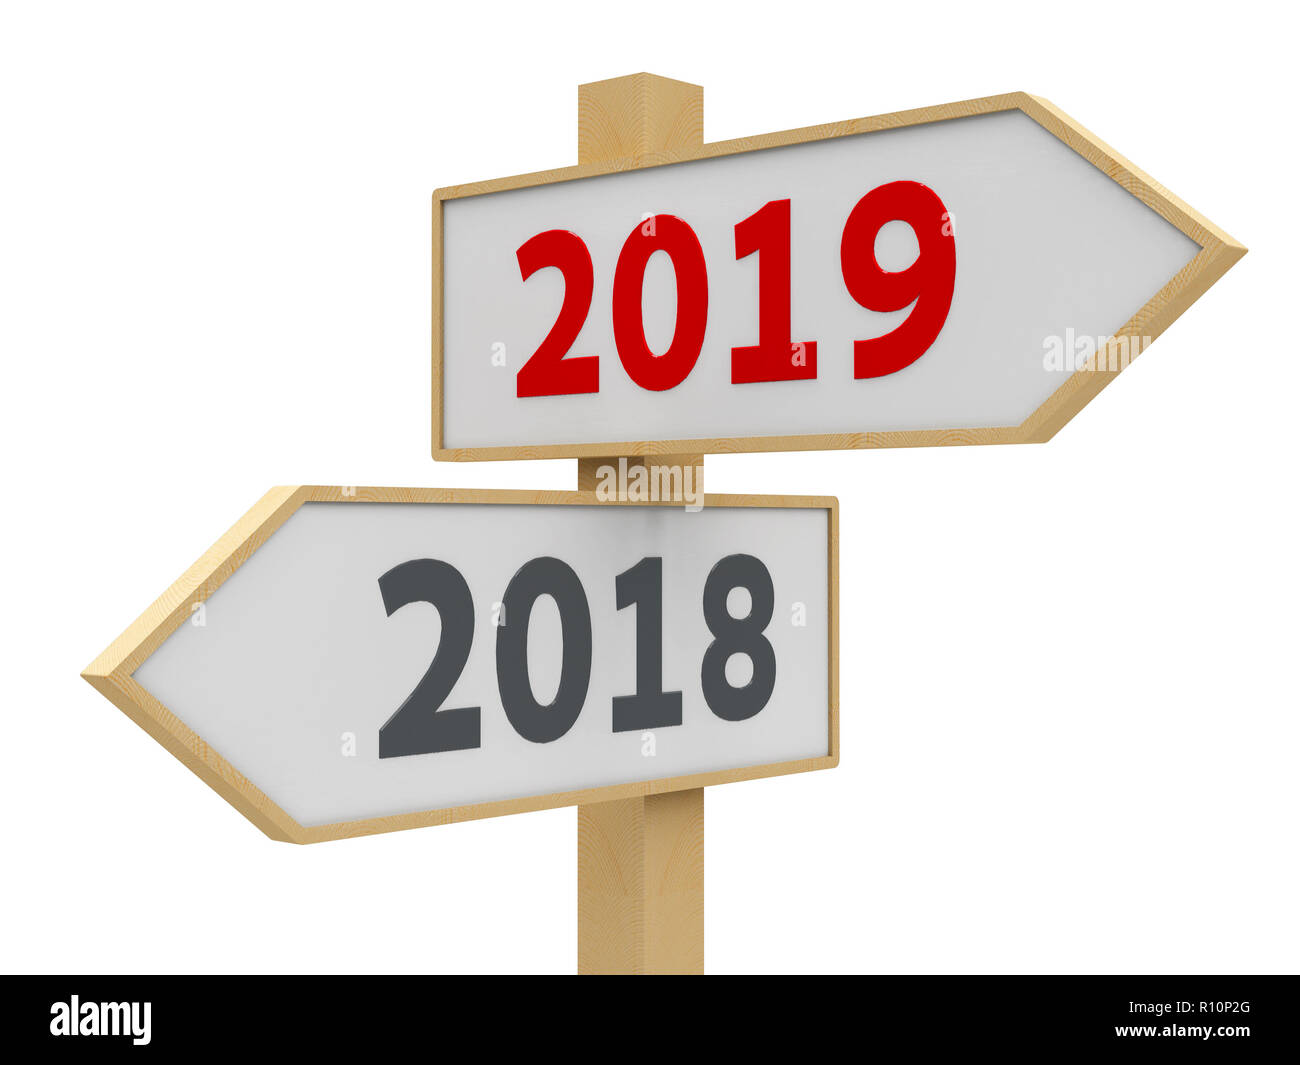 Road sign with 2018-2019 change on white background represents the new 2019, three-dimensional rendering Stock Photo